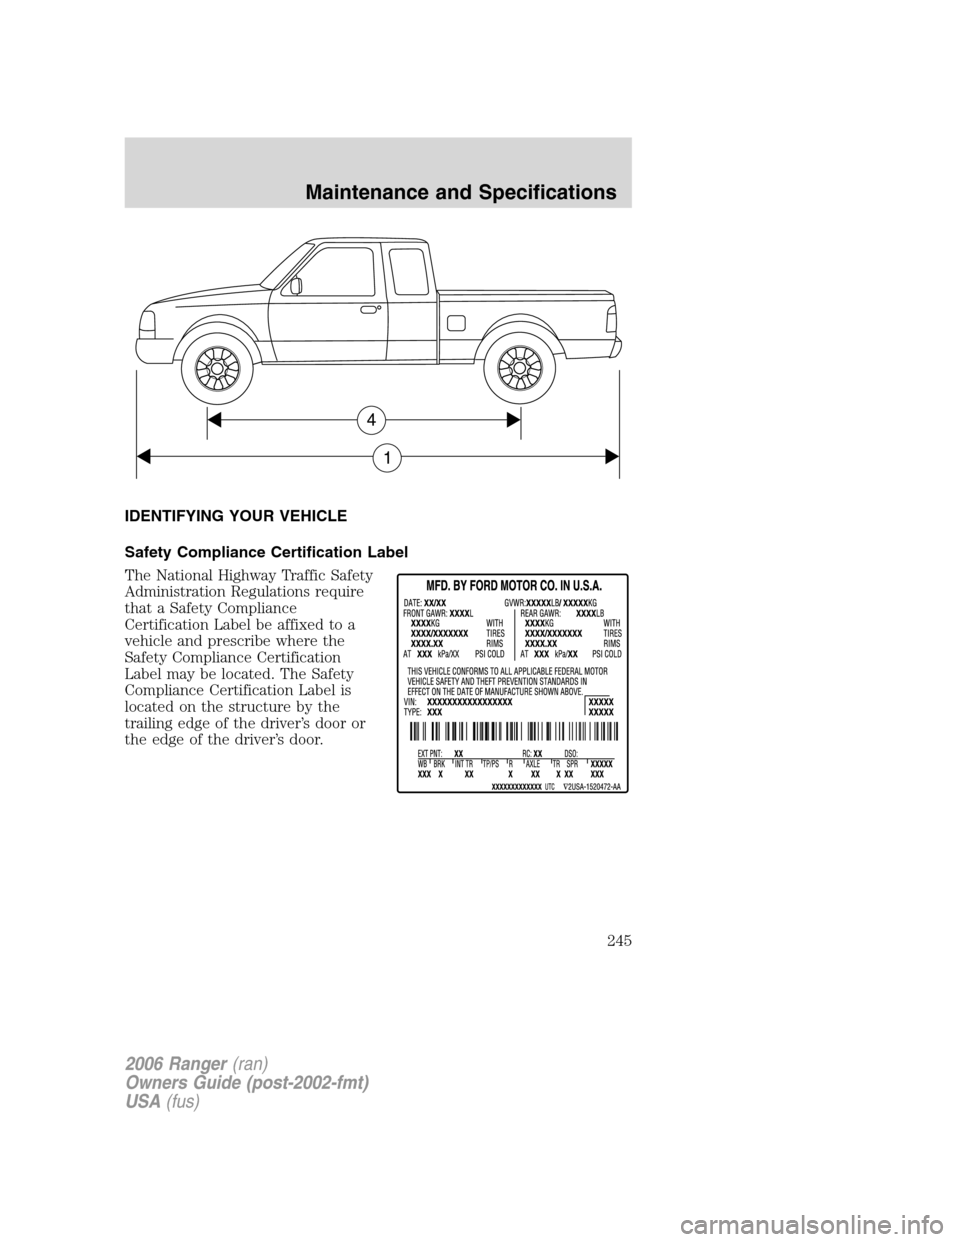 FORD RANGER 2006 2.G Repair Manual IDENTIFYING YOUR VEHICLE
Safety Compliance Certification Label
The National Highway Traffic Safety
Administration Regulations require
that a Safety Compliance
Certification Label be affixed to a
vehic